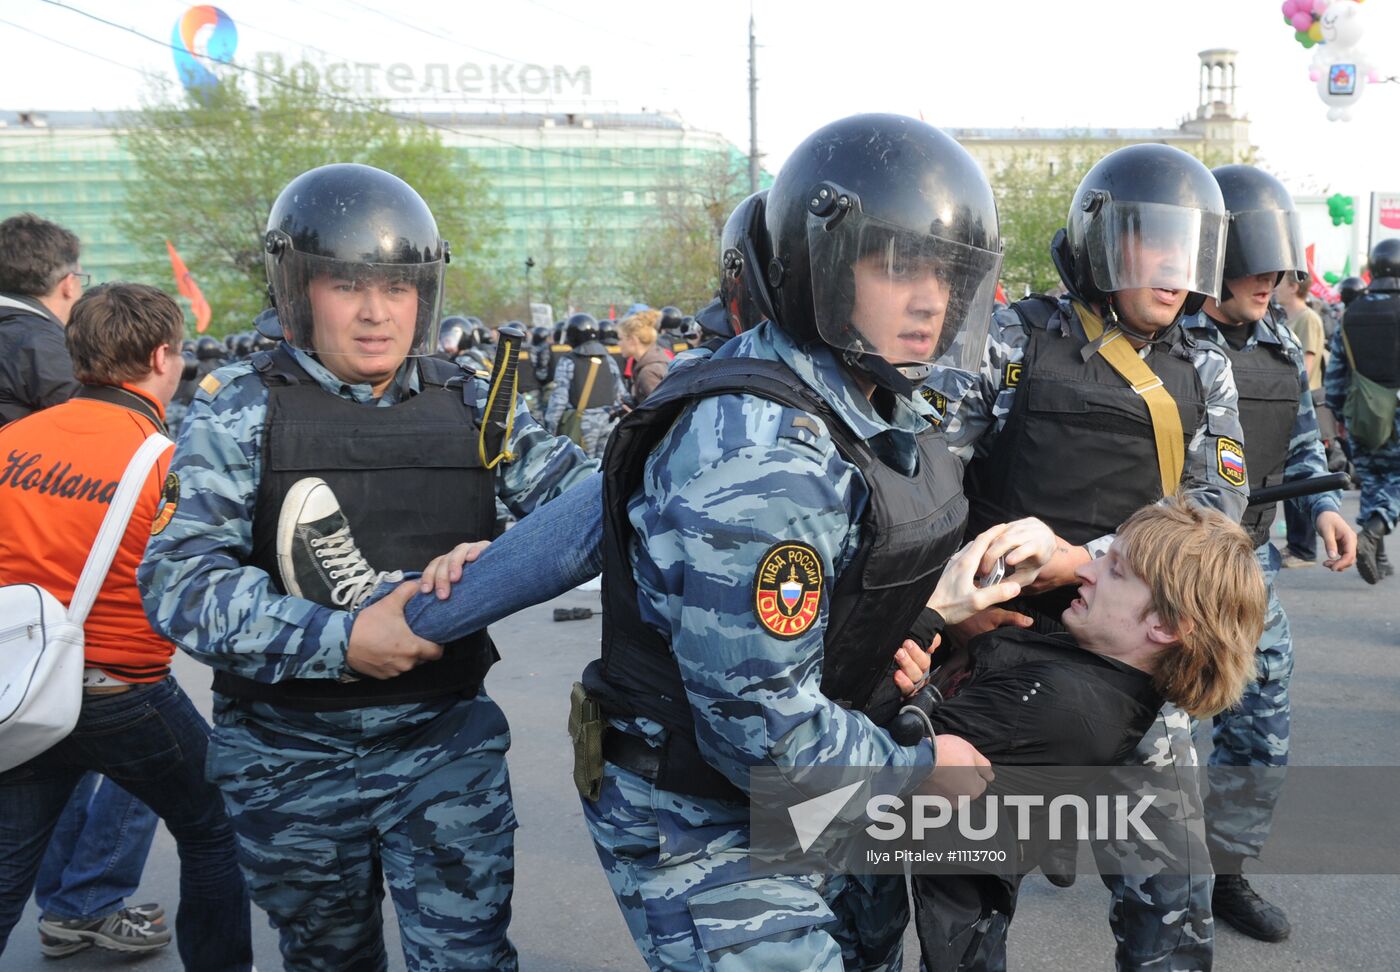 March of Millions participants detained in Moscow